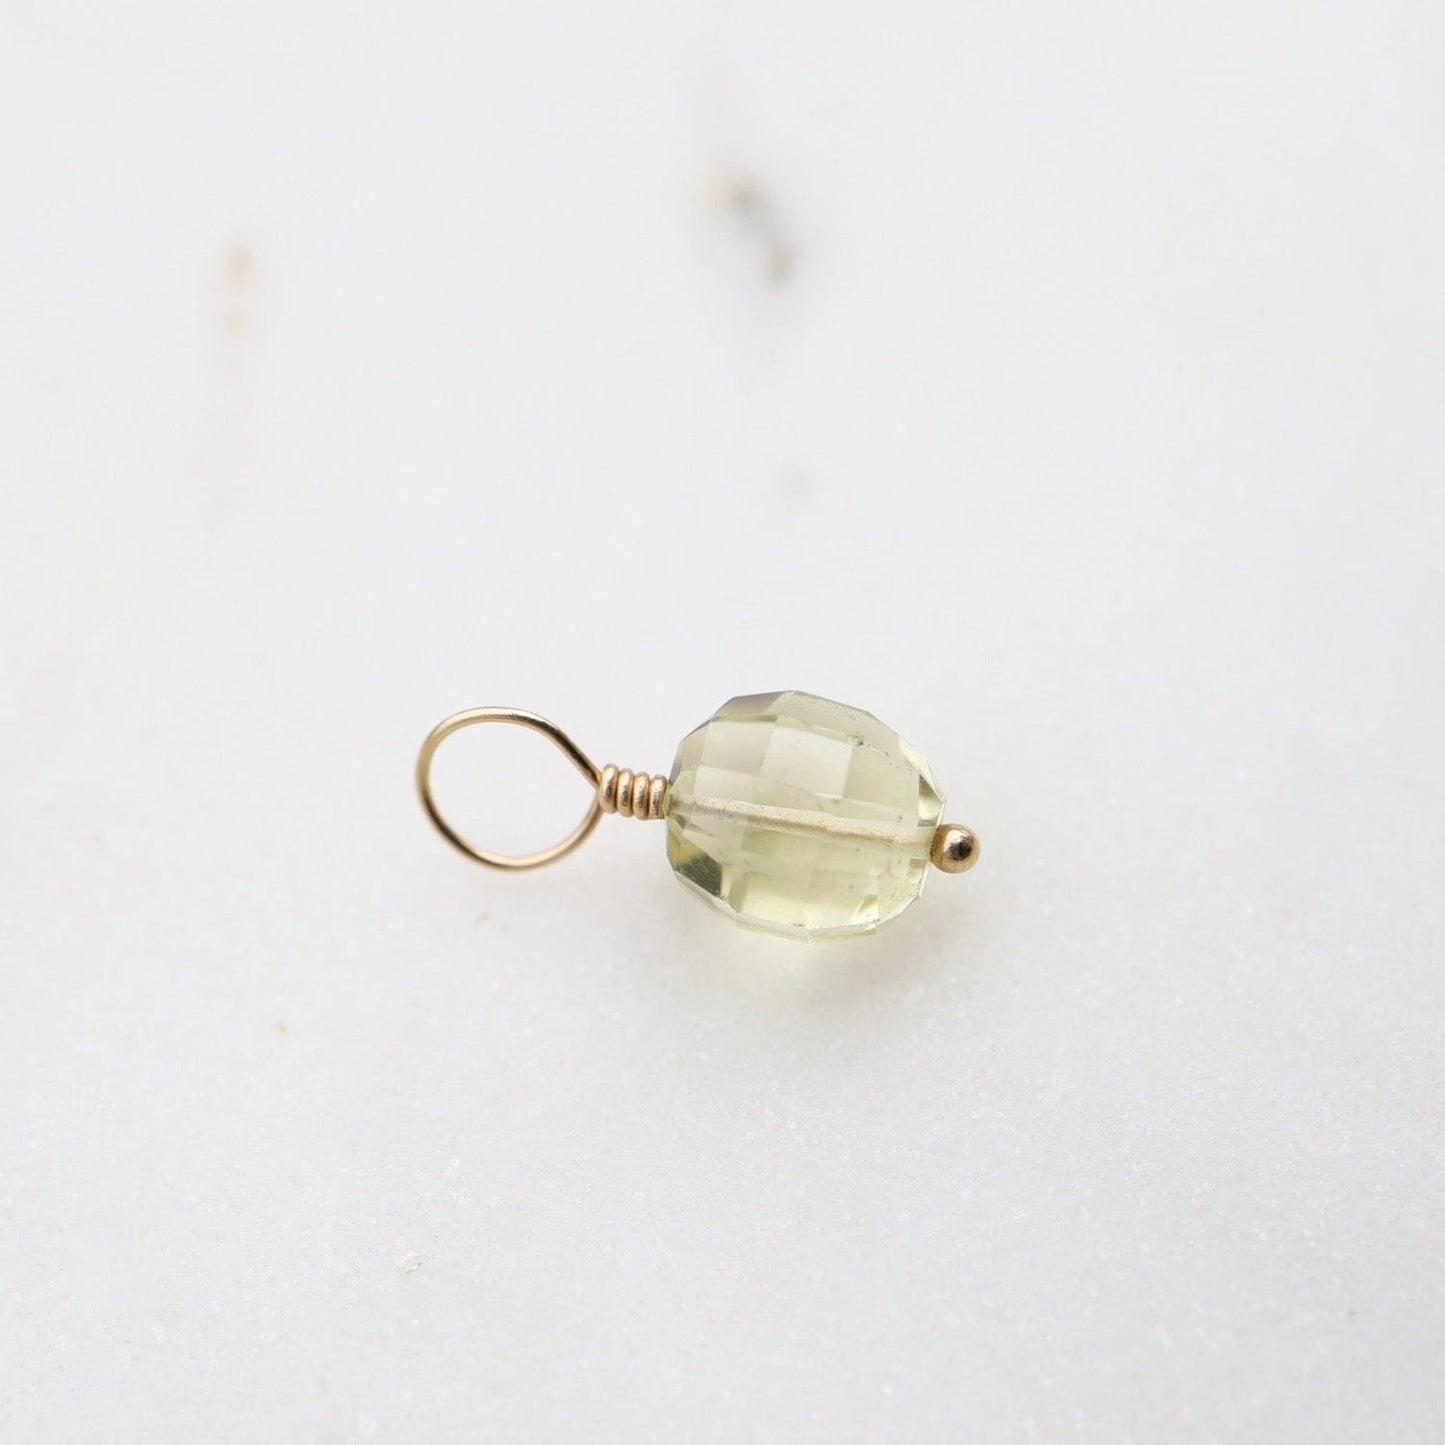 CHM Lemon Quartz - Faceted Pale Yellow-Green Gemstone on 14K Gold Wire